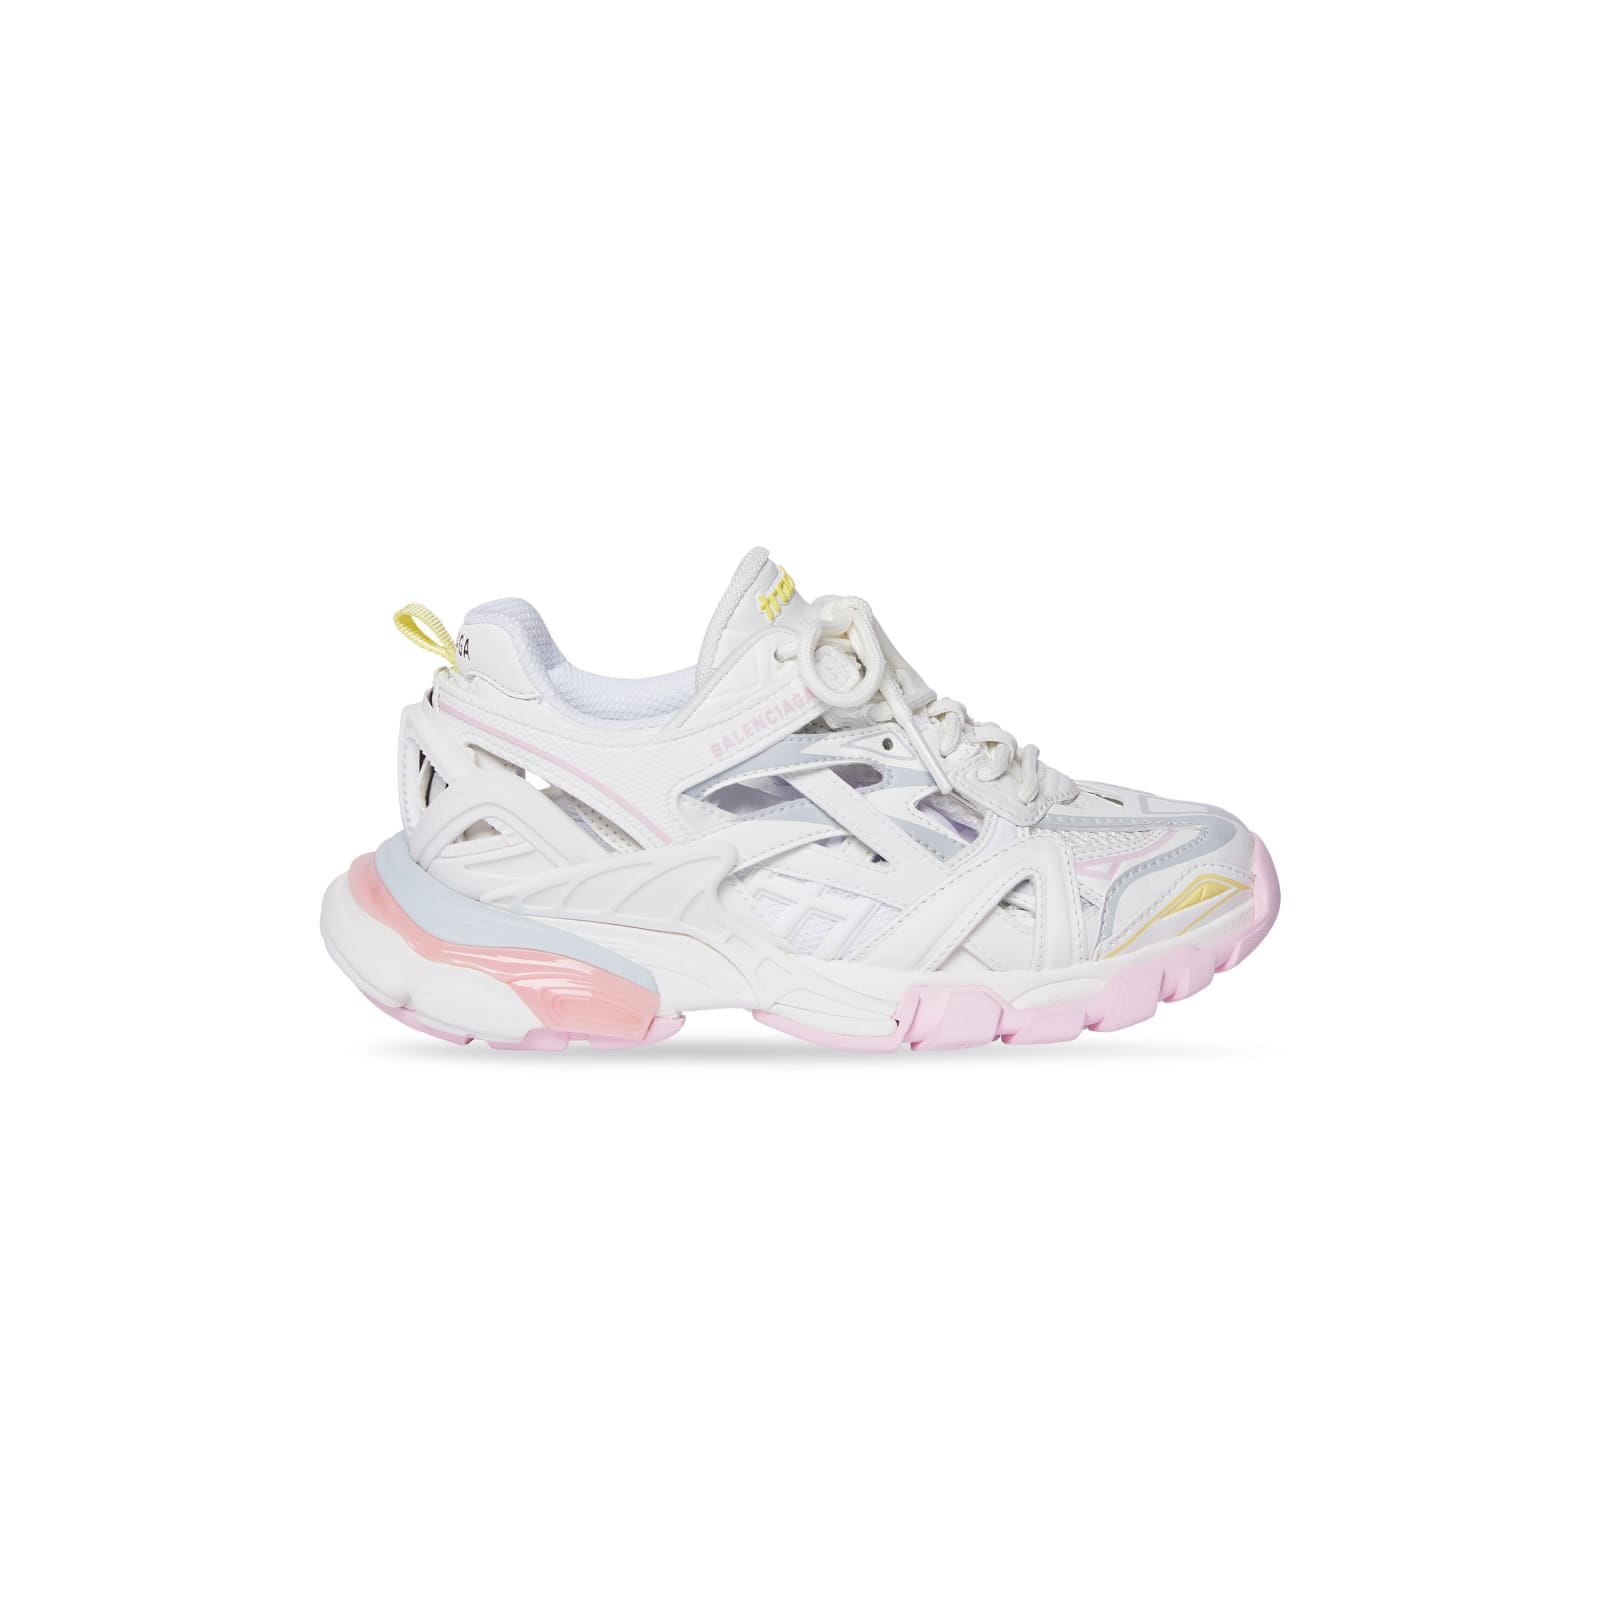 Balenciaga White Track.2 Sneakers With Multicolored Details